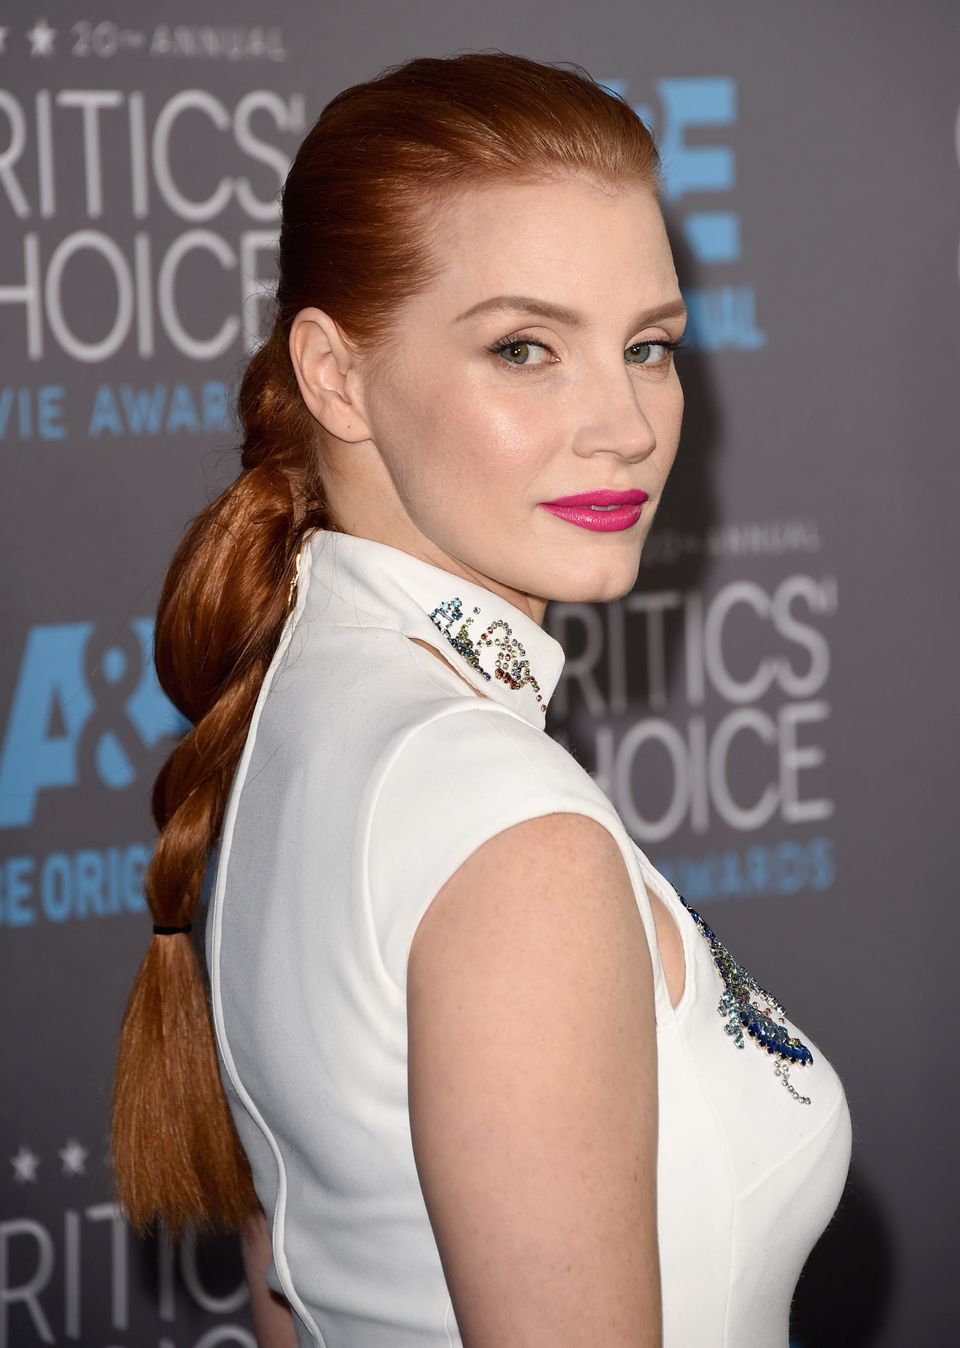 Jessica Chastain Breaks All The Redhead Beauty Rules And Looks Amazing Huffpost Life